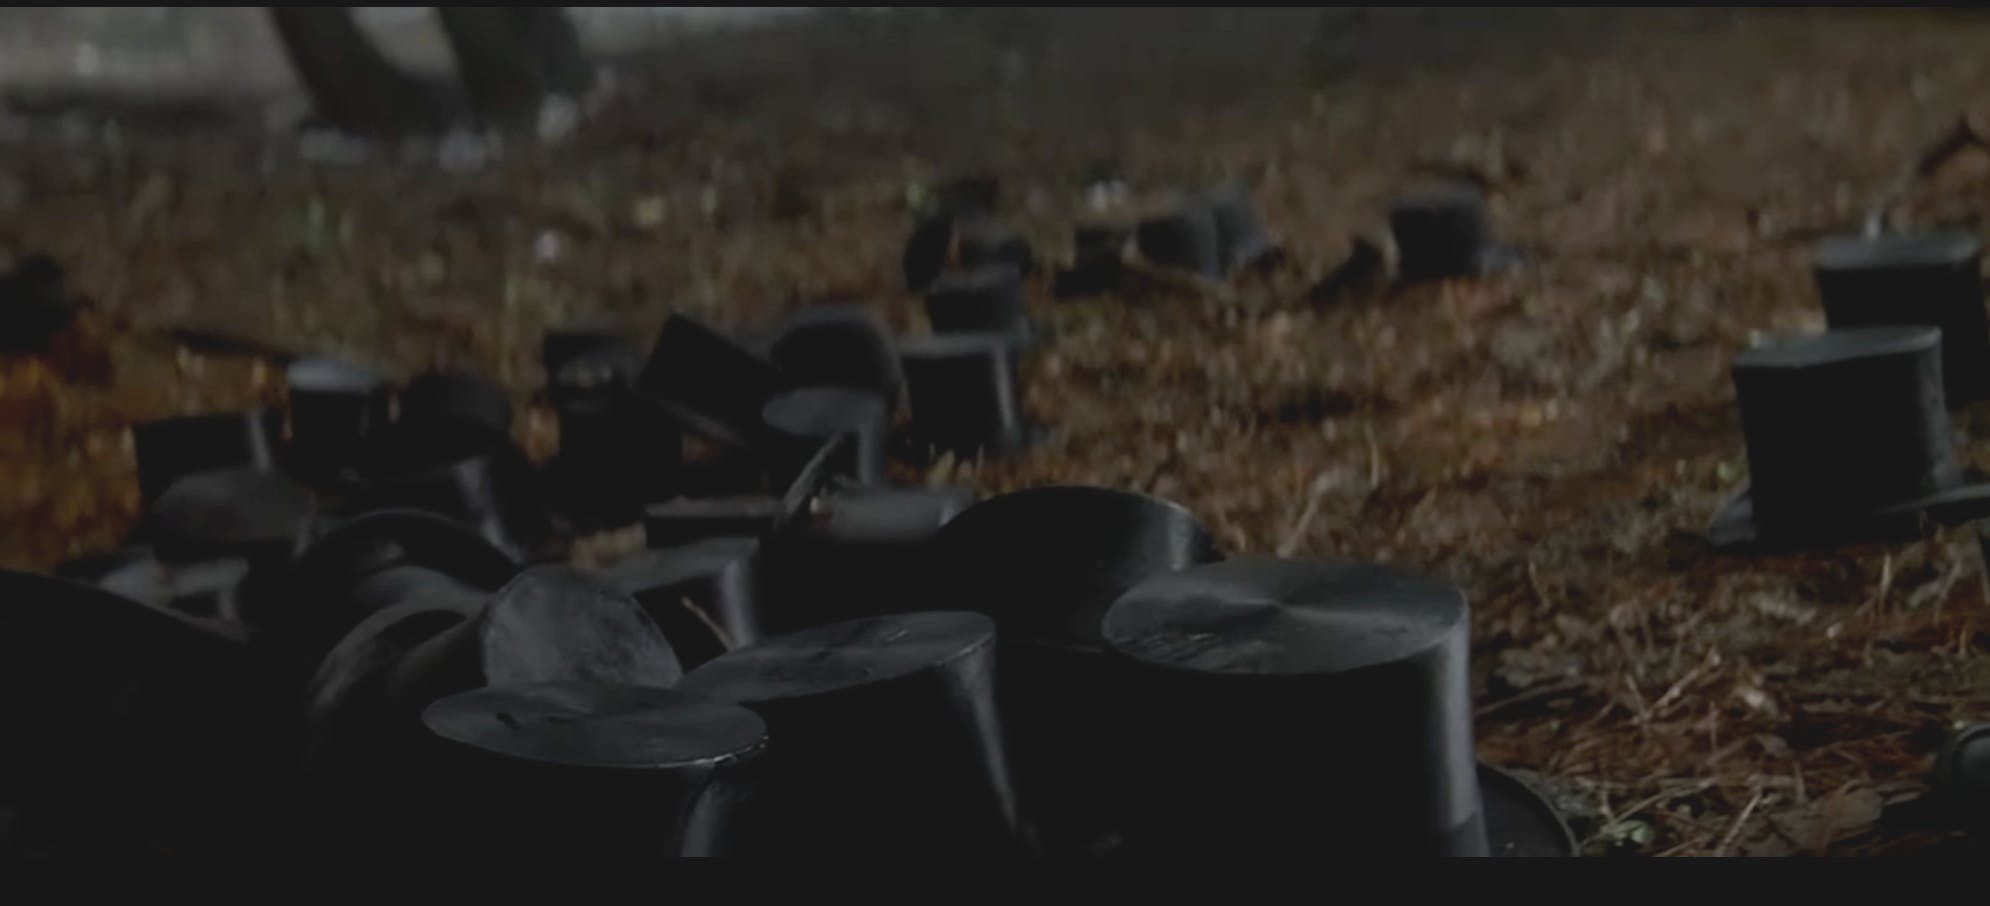 The opening image of the movie The Prestige shows a series of top-hats strewn about the forest floor. Something that will only make sense when the movie is over. 